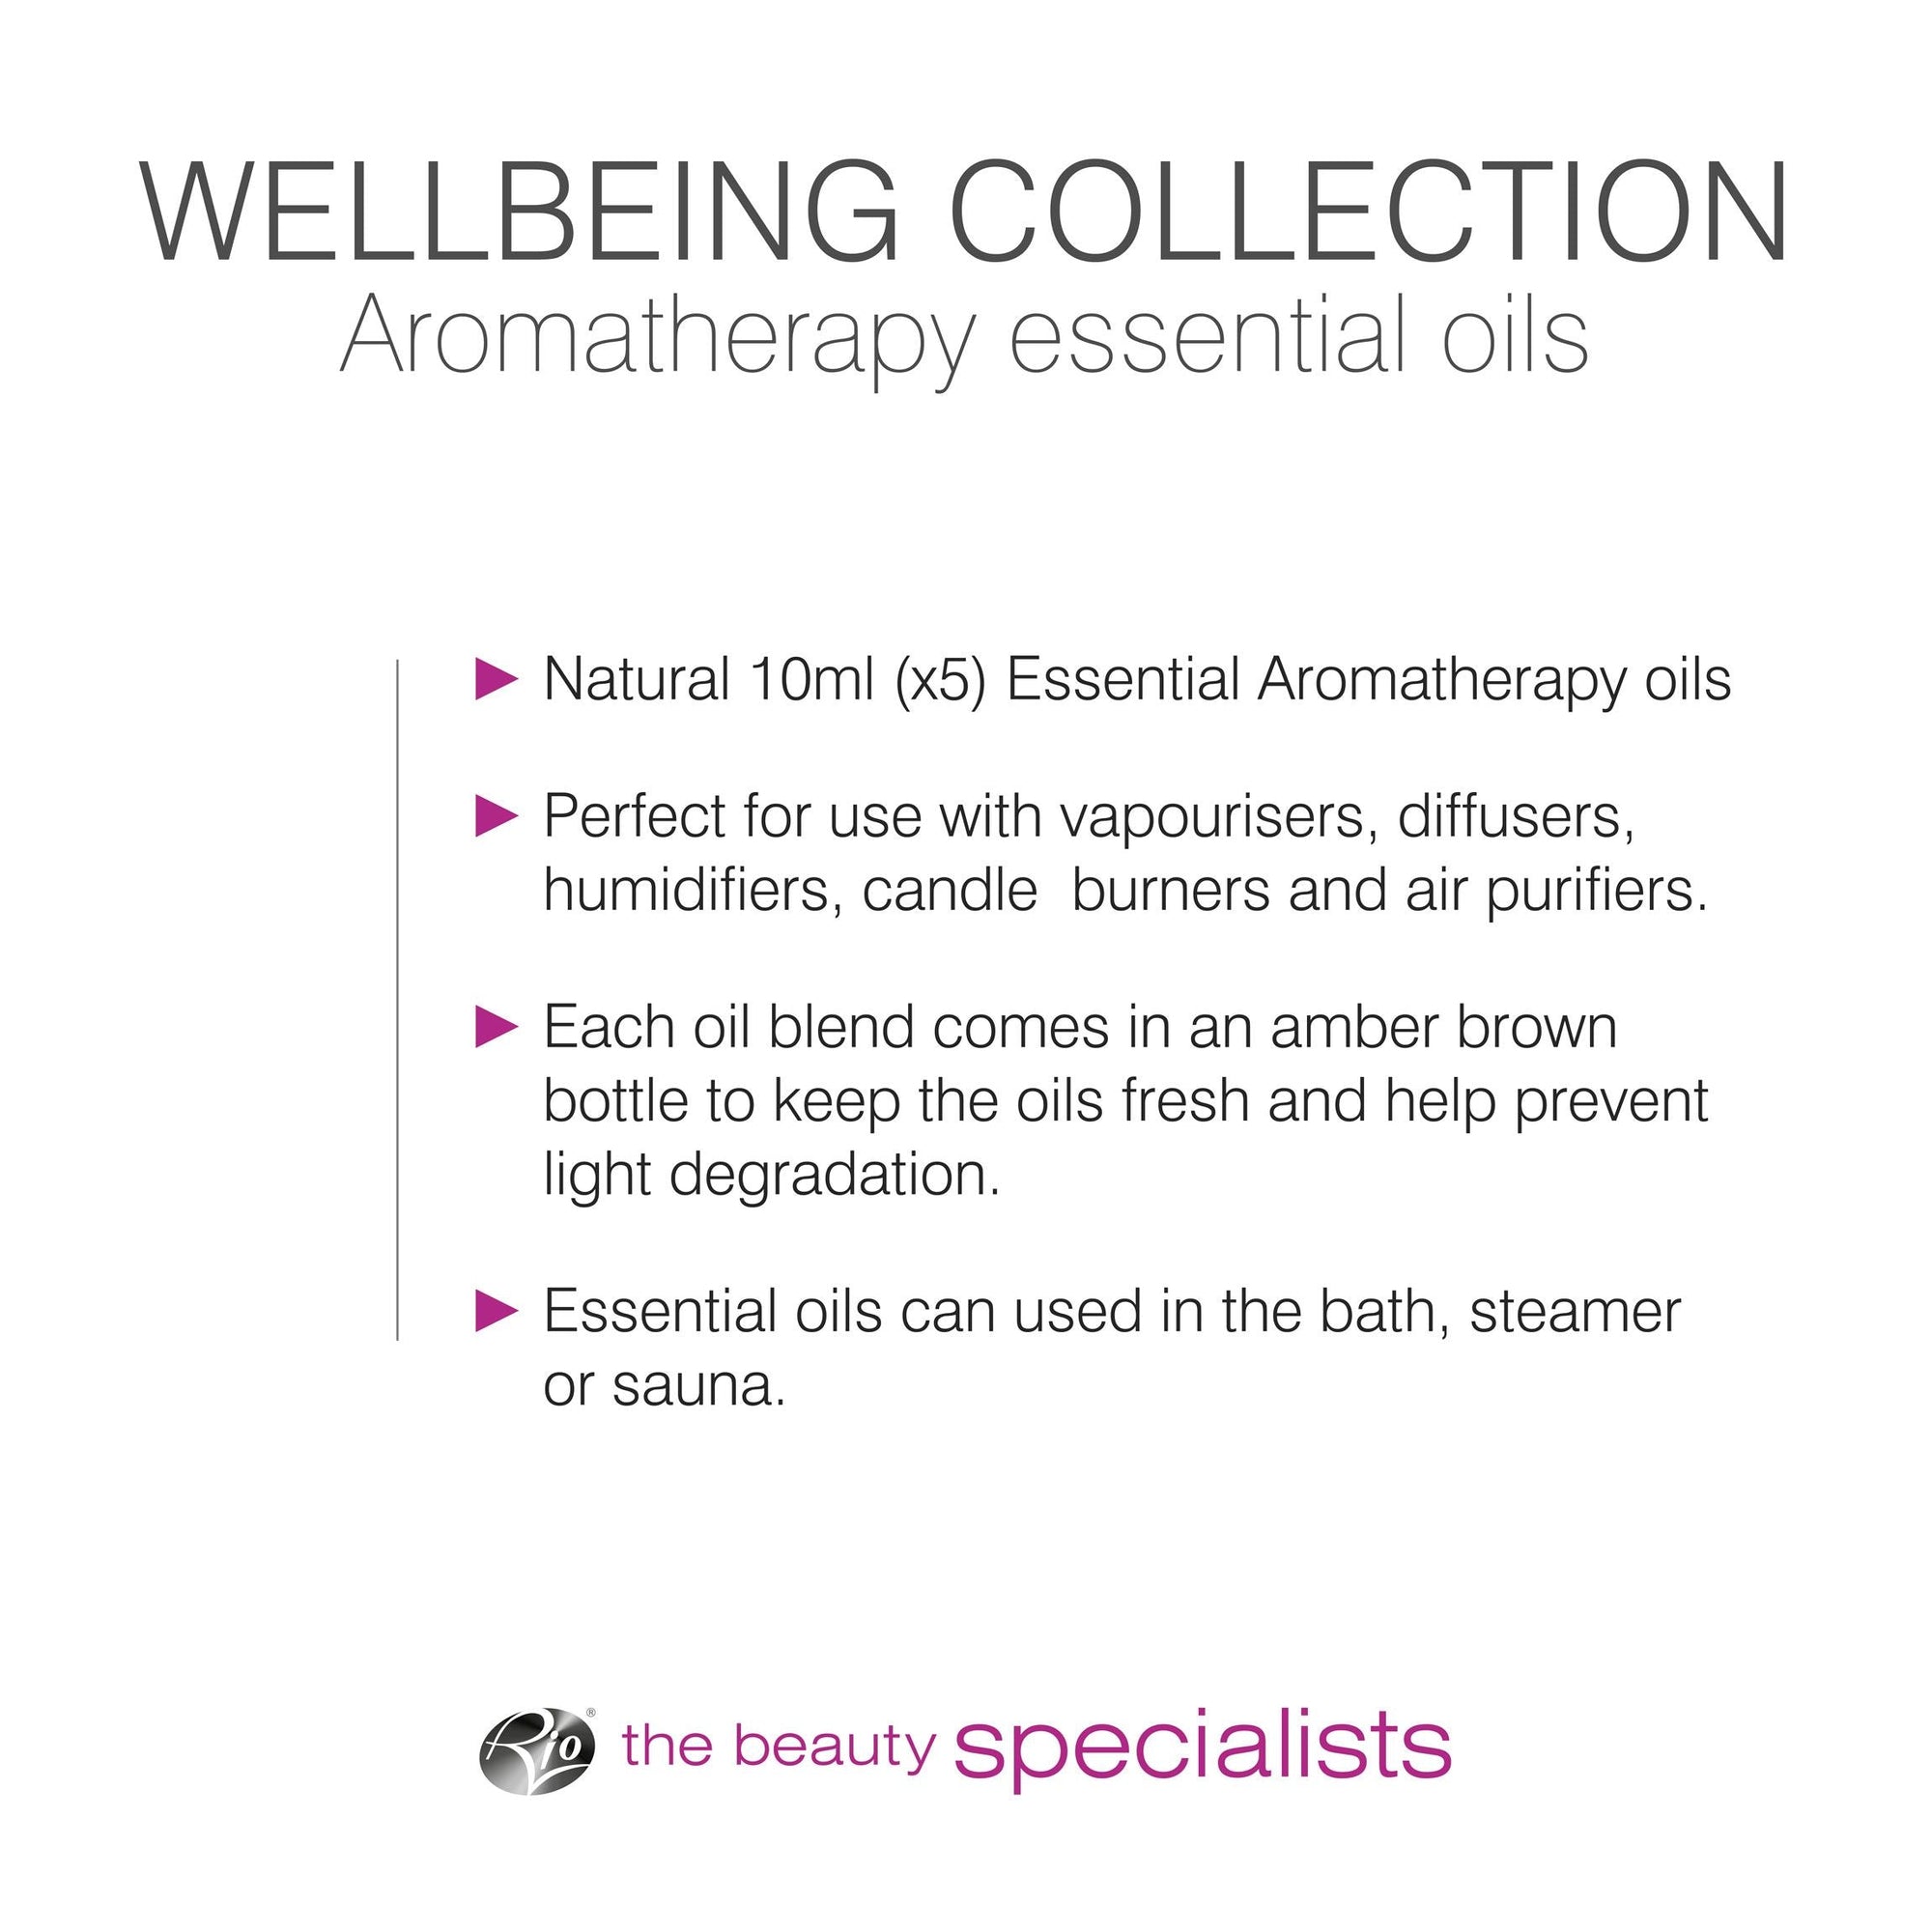 bulleted text listing features of wellbeing oil collection natural 10ml essential aromatherapy oils perfect for use with vaporisers diffusers humidifiers candle burners and air purifiers each oil blend comes in an amber brown bottle to keep the oils fresh and help prevent light degradation essential oils can be used in the bath steamer or sauna 